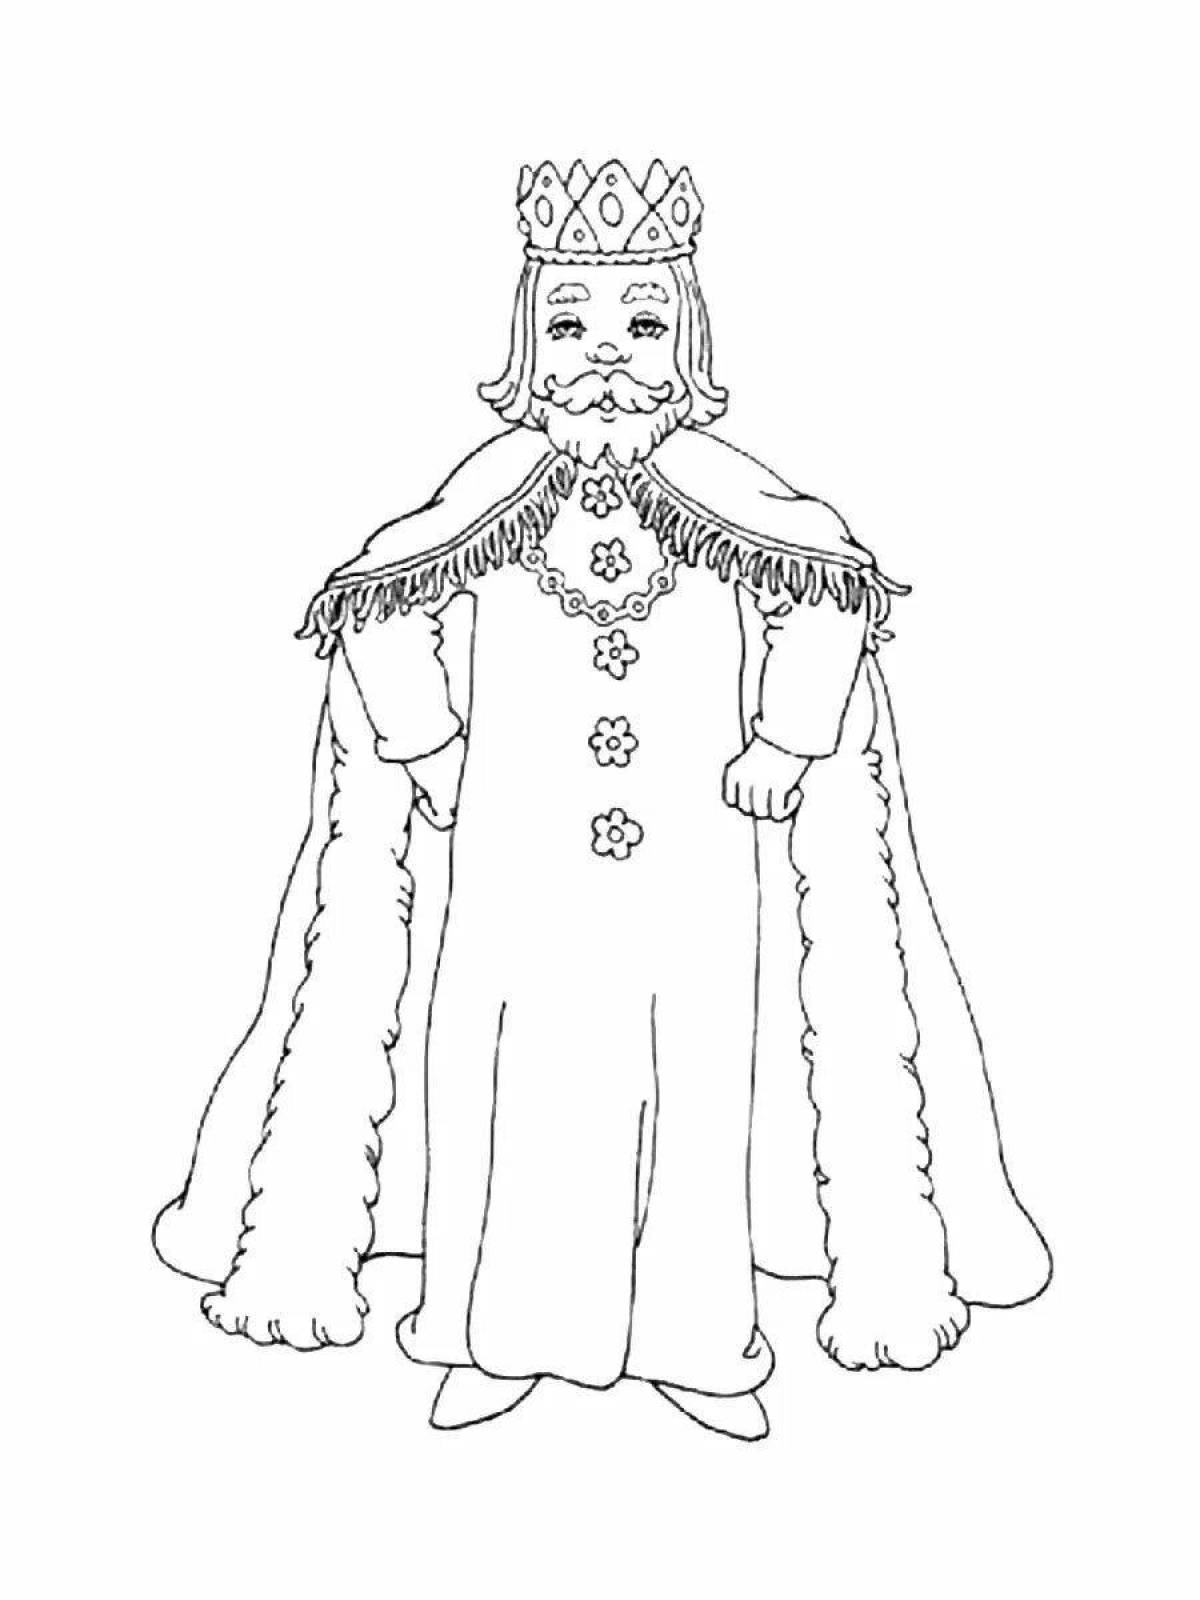 Joyful king coloring pages for kids